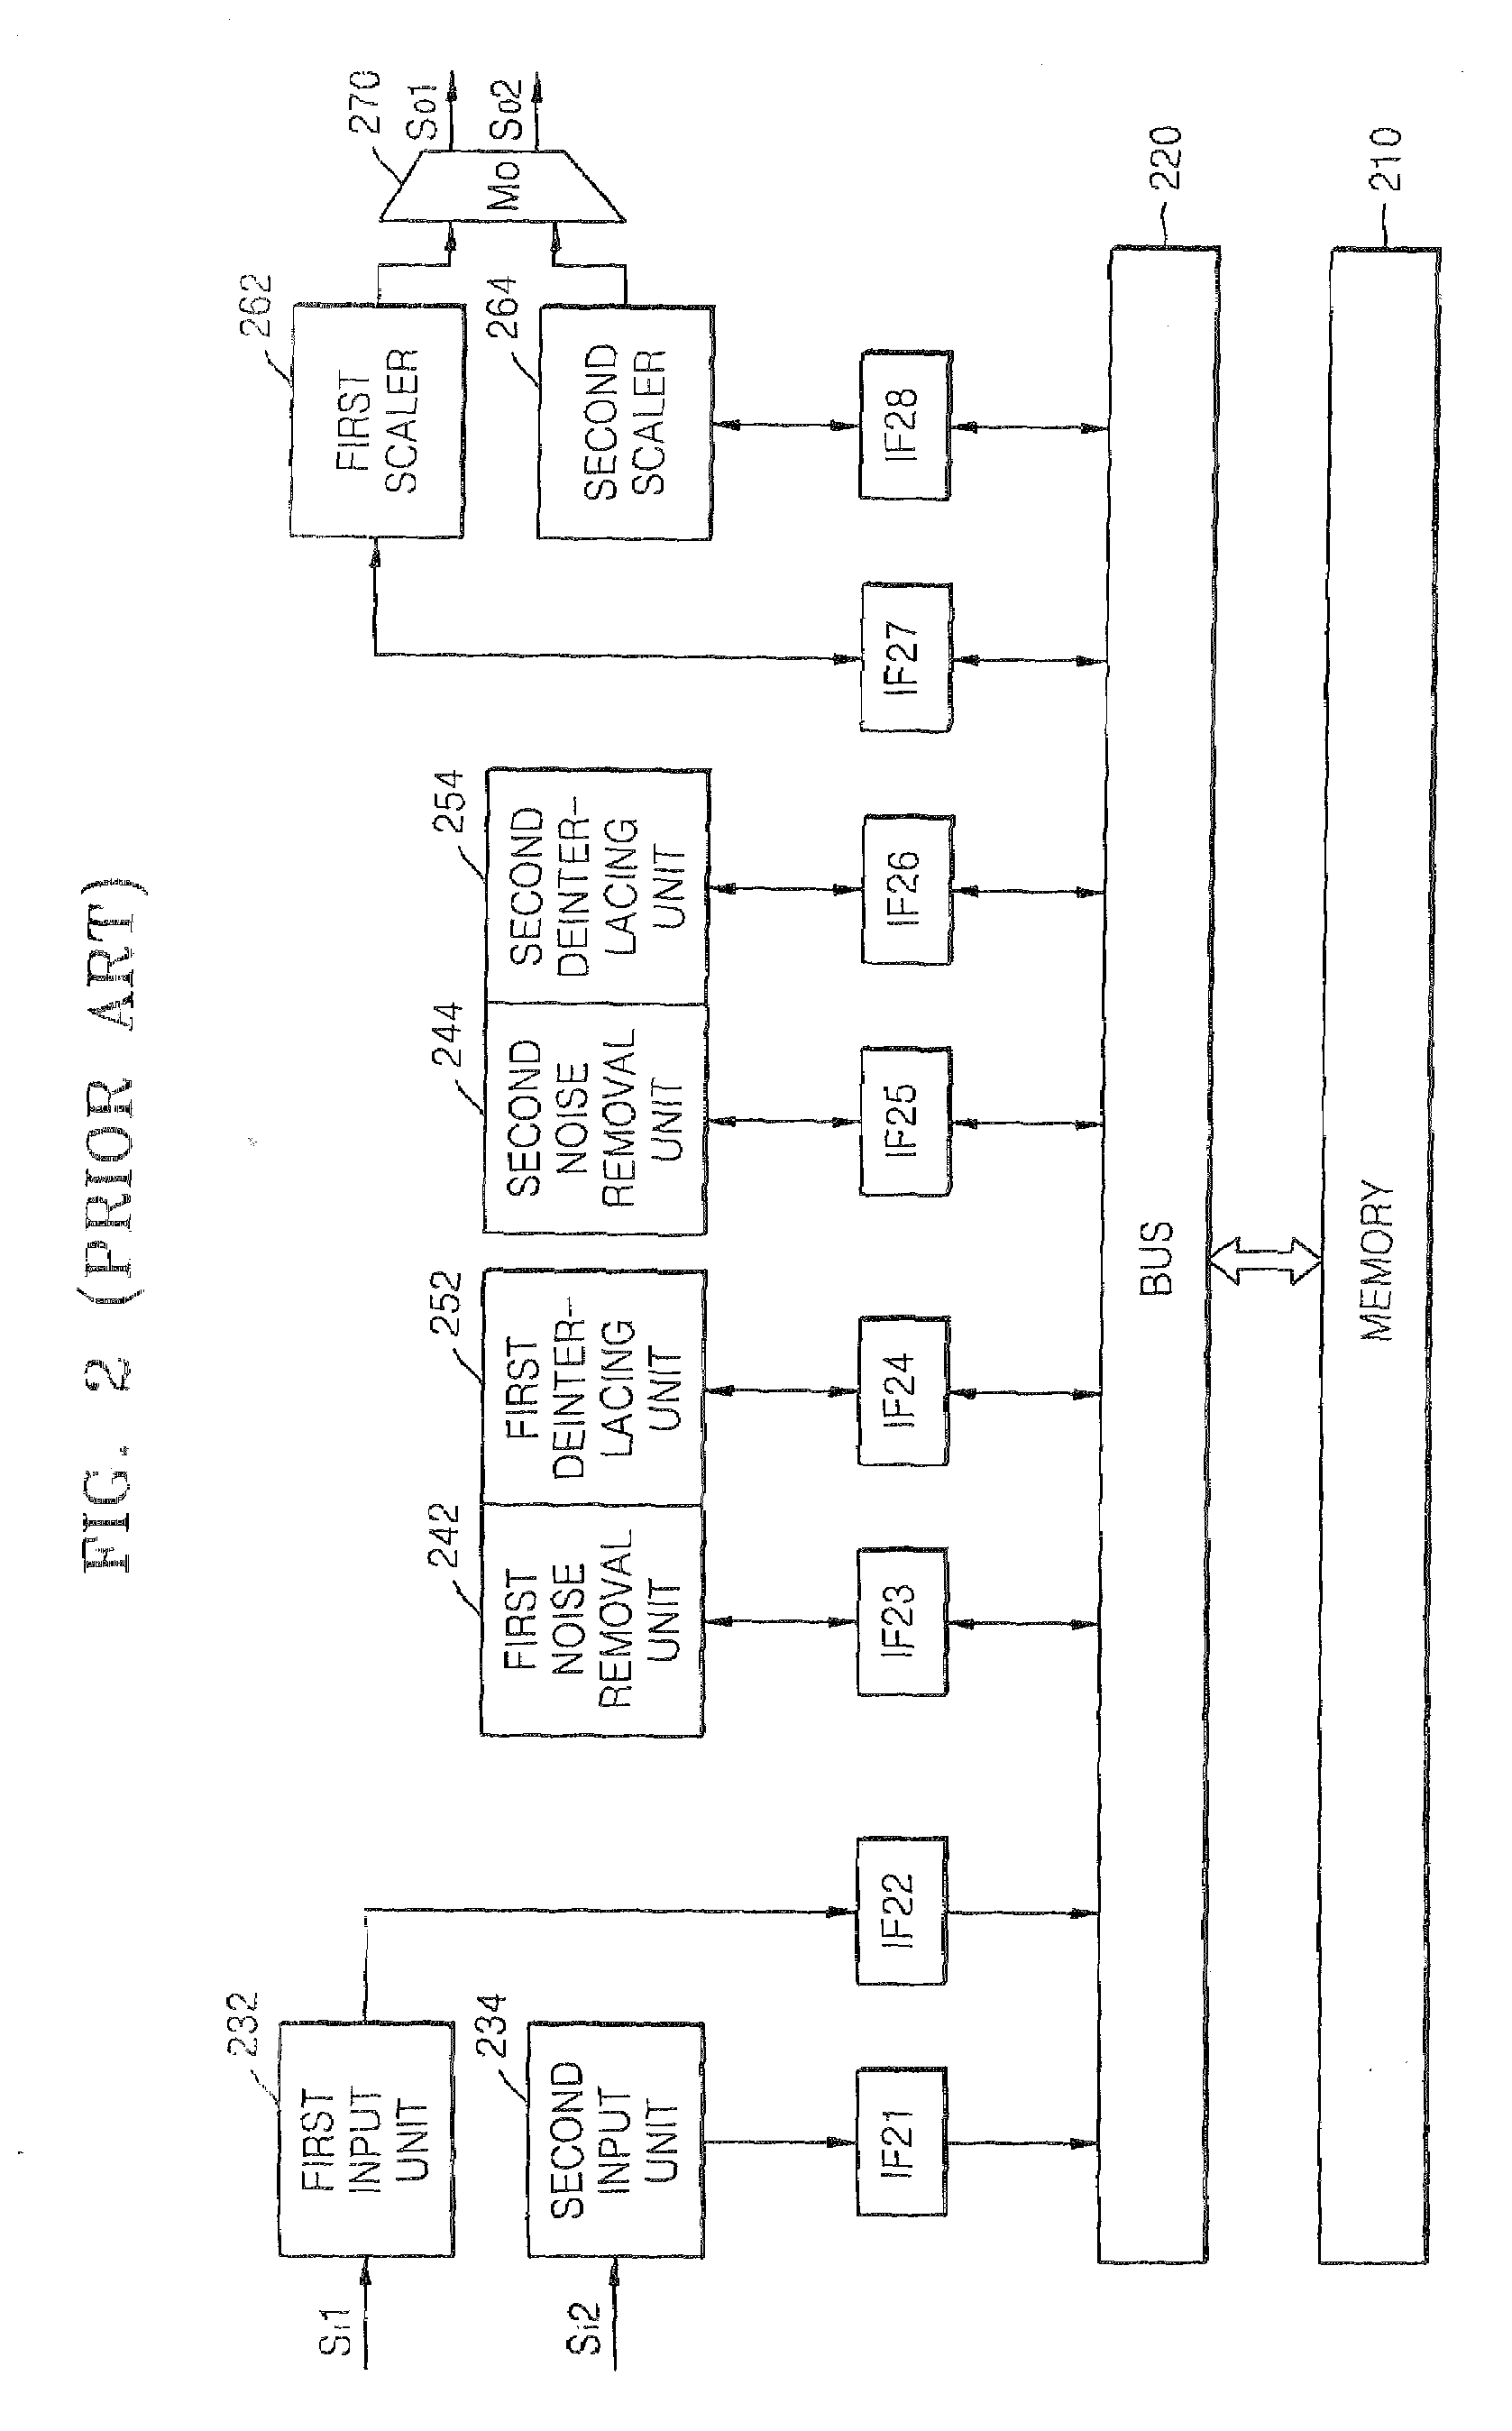 Apparatus and method for processing image signal without requiring high memory bandwidth